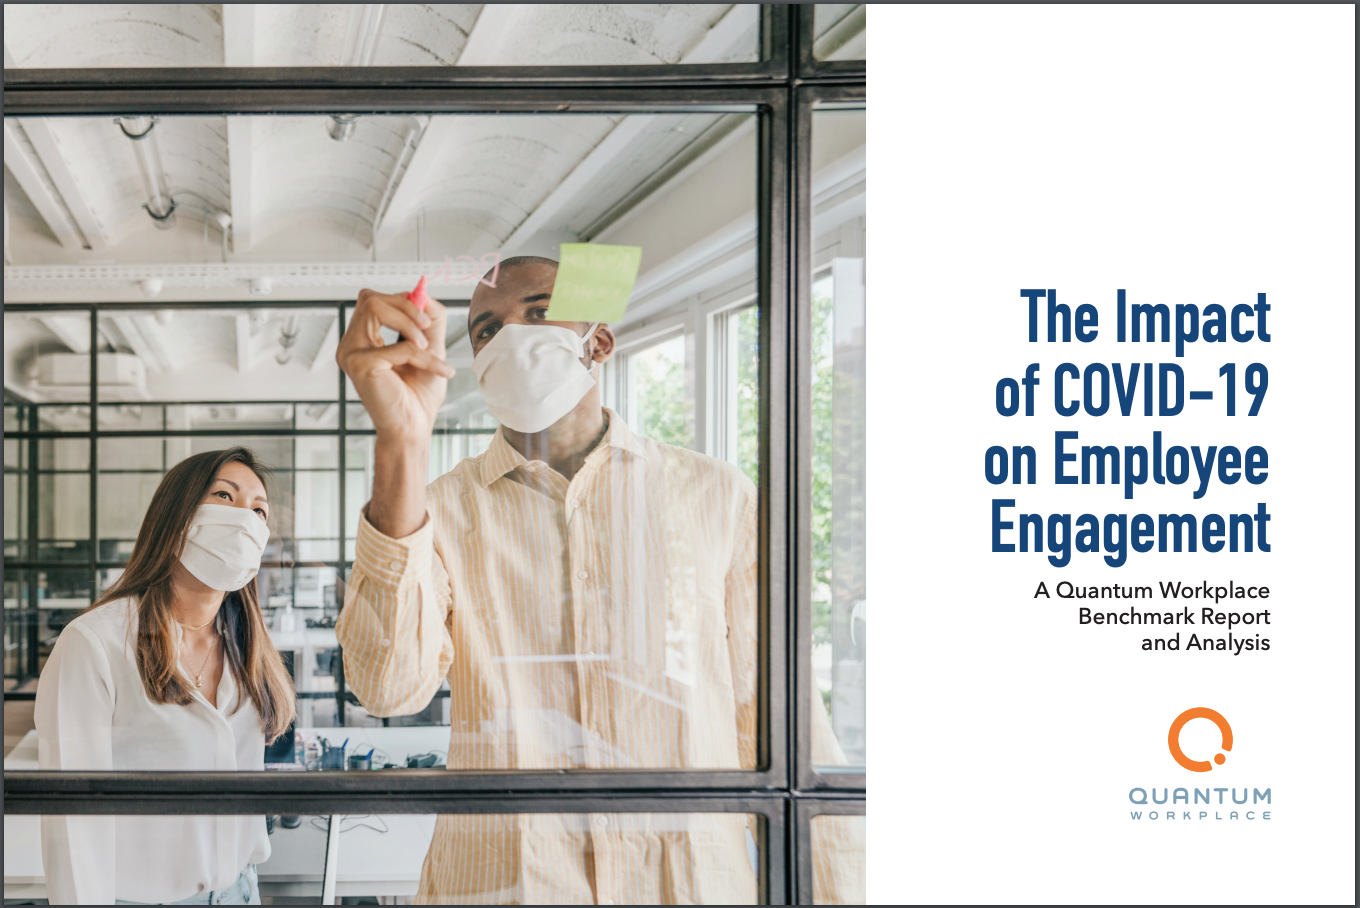 literature review on employee engagement during covid 19